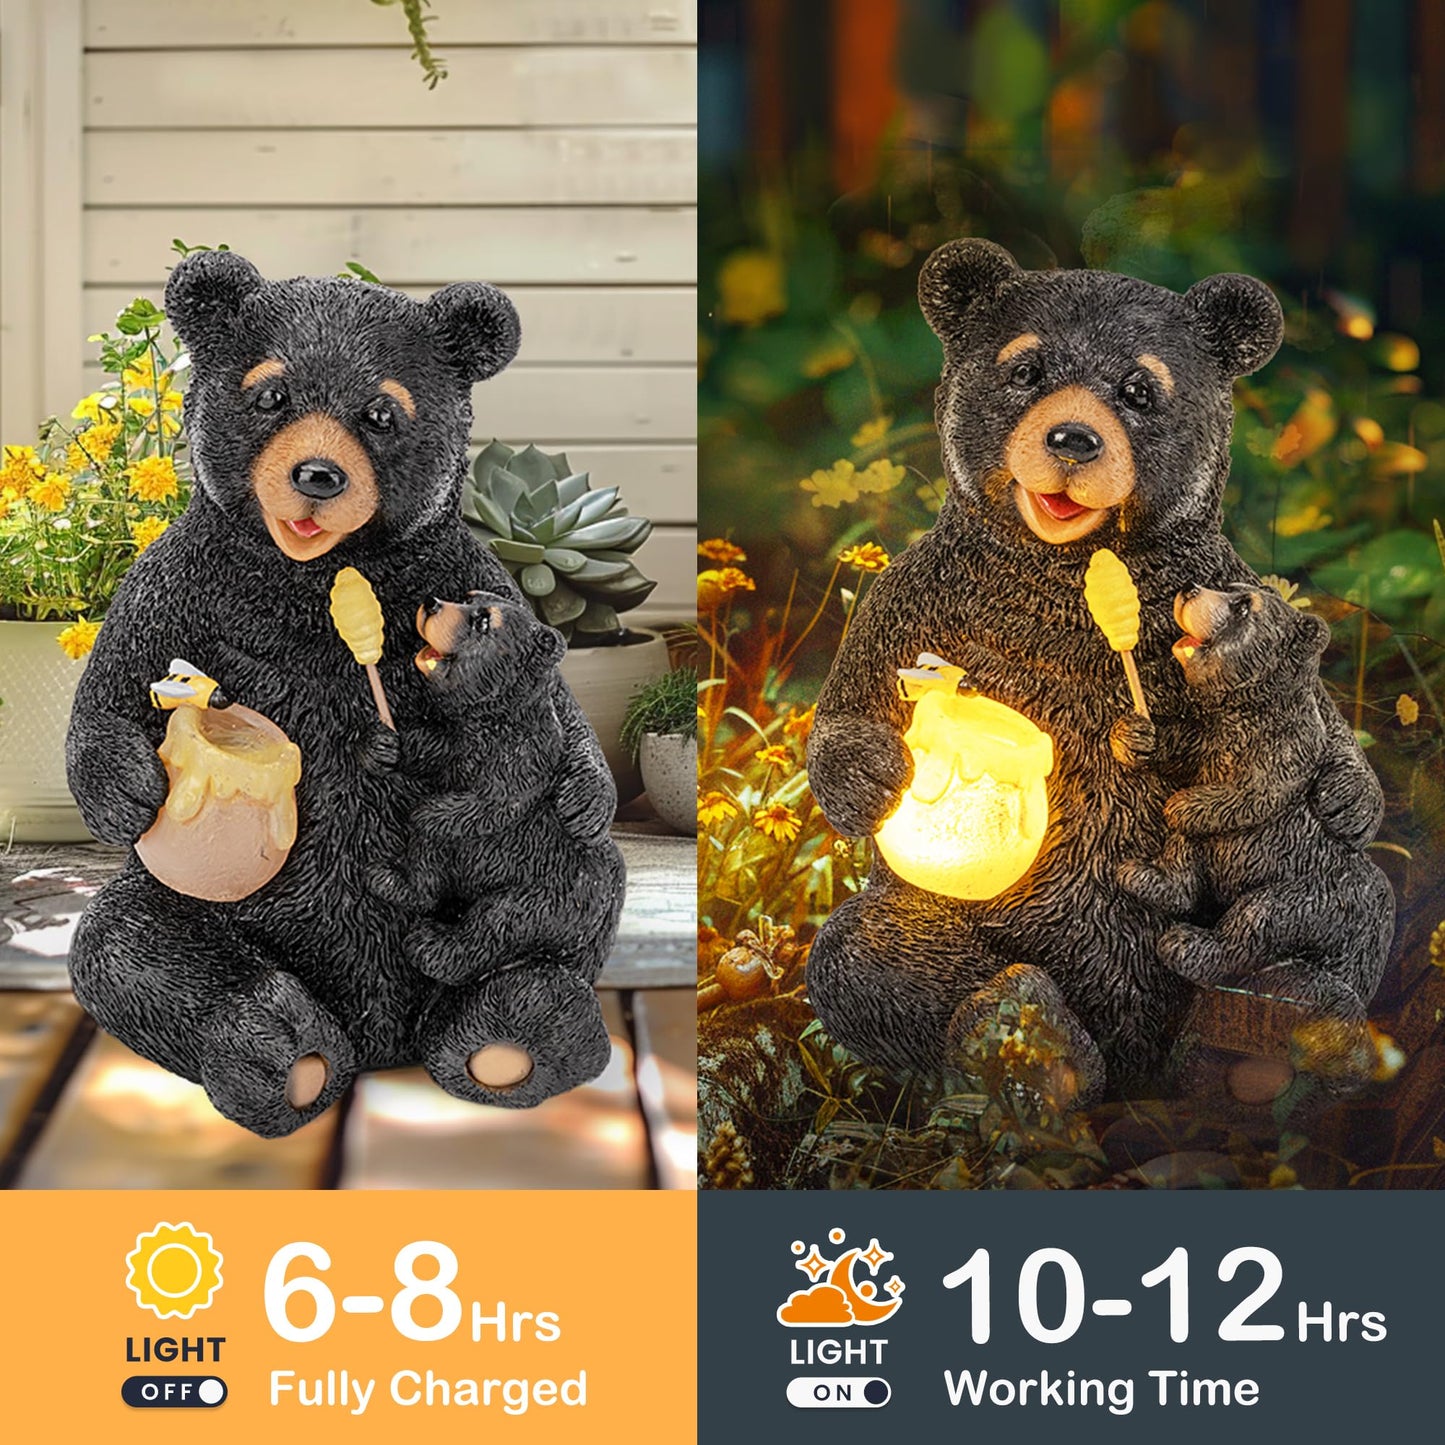 GIGALUMI Solar Garden Statues Loving Bear Figurine Lights for Outside, Yard Decorations Outdoor, Garden Decor Unique Birthday Housewarming Gifts for Mom, Women